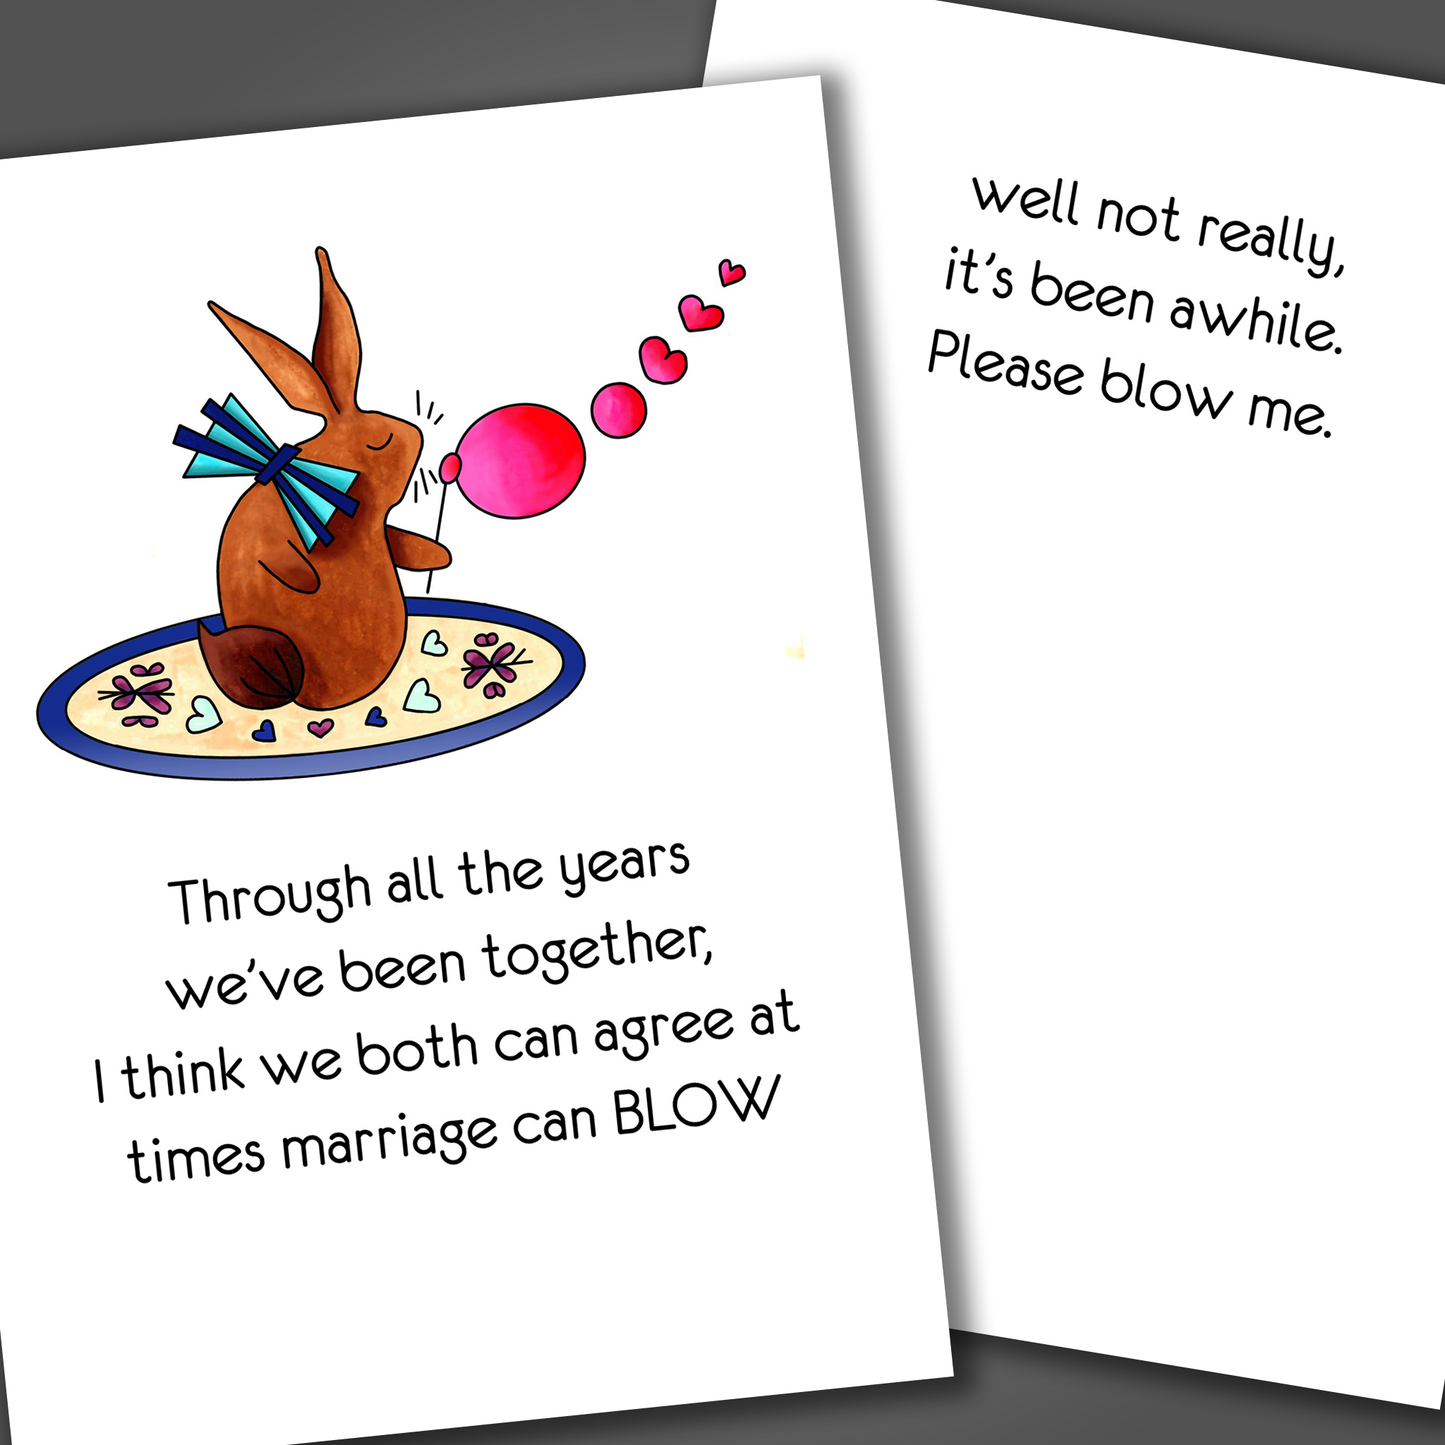 Funny anniversary card with a brown rabbit blowing balloons on front of card and a funny joke inside card that says it's been a while, please blow me!